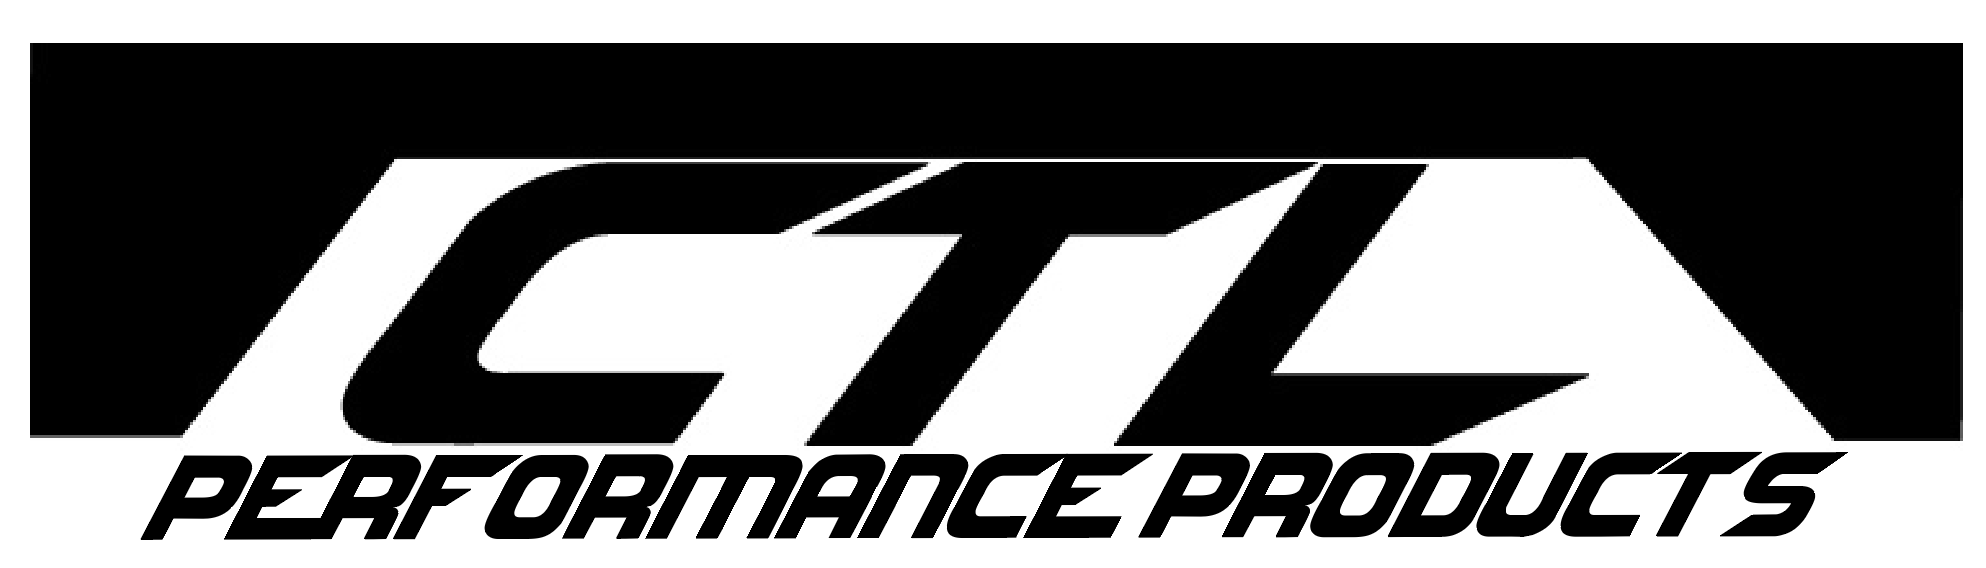 CTL PERFORMANCE PRODUCTS